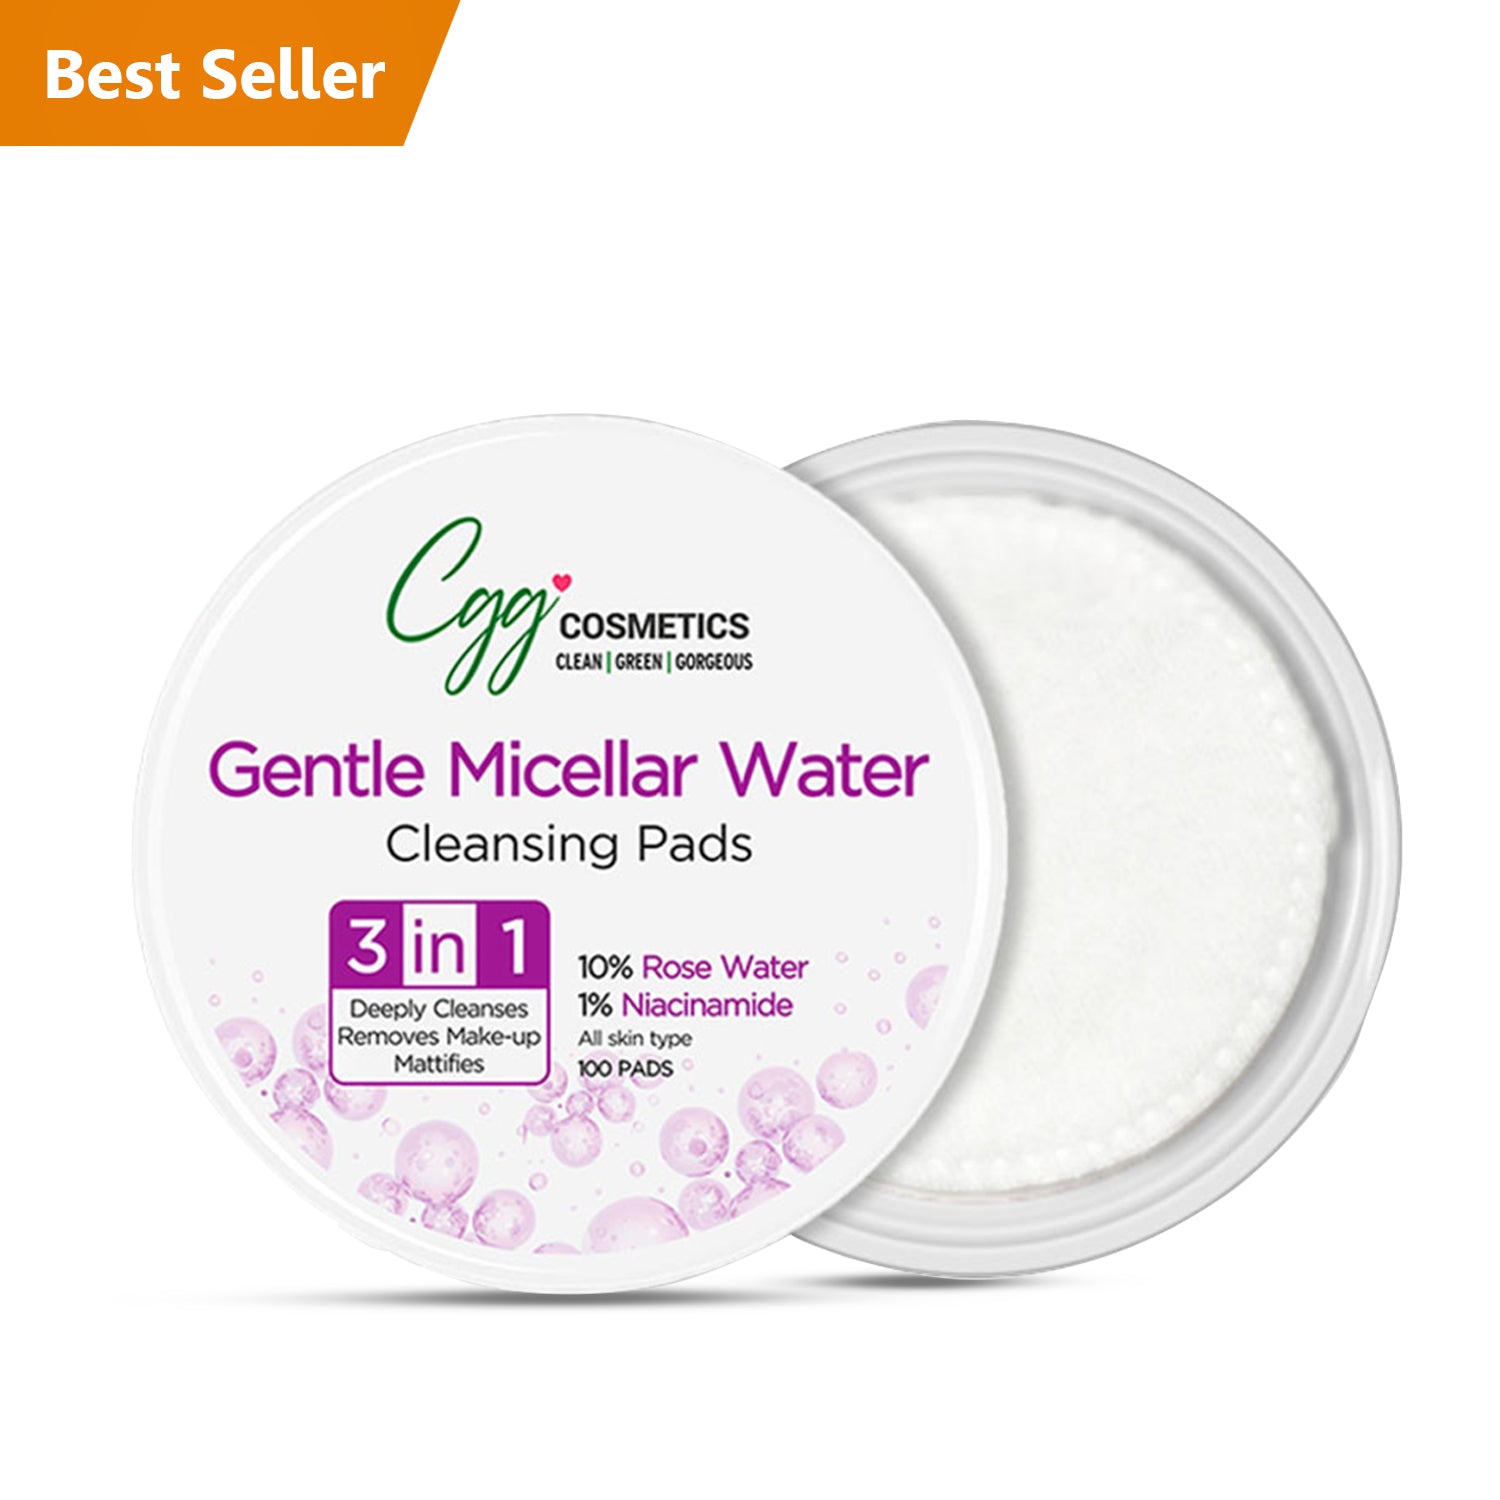 CGG Cosmetics Gentle Micellar Water Cleansing Pads - For Removing Stubborn Makeup - 100 Pads